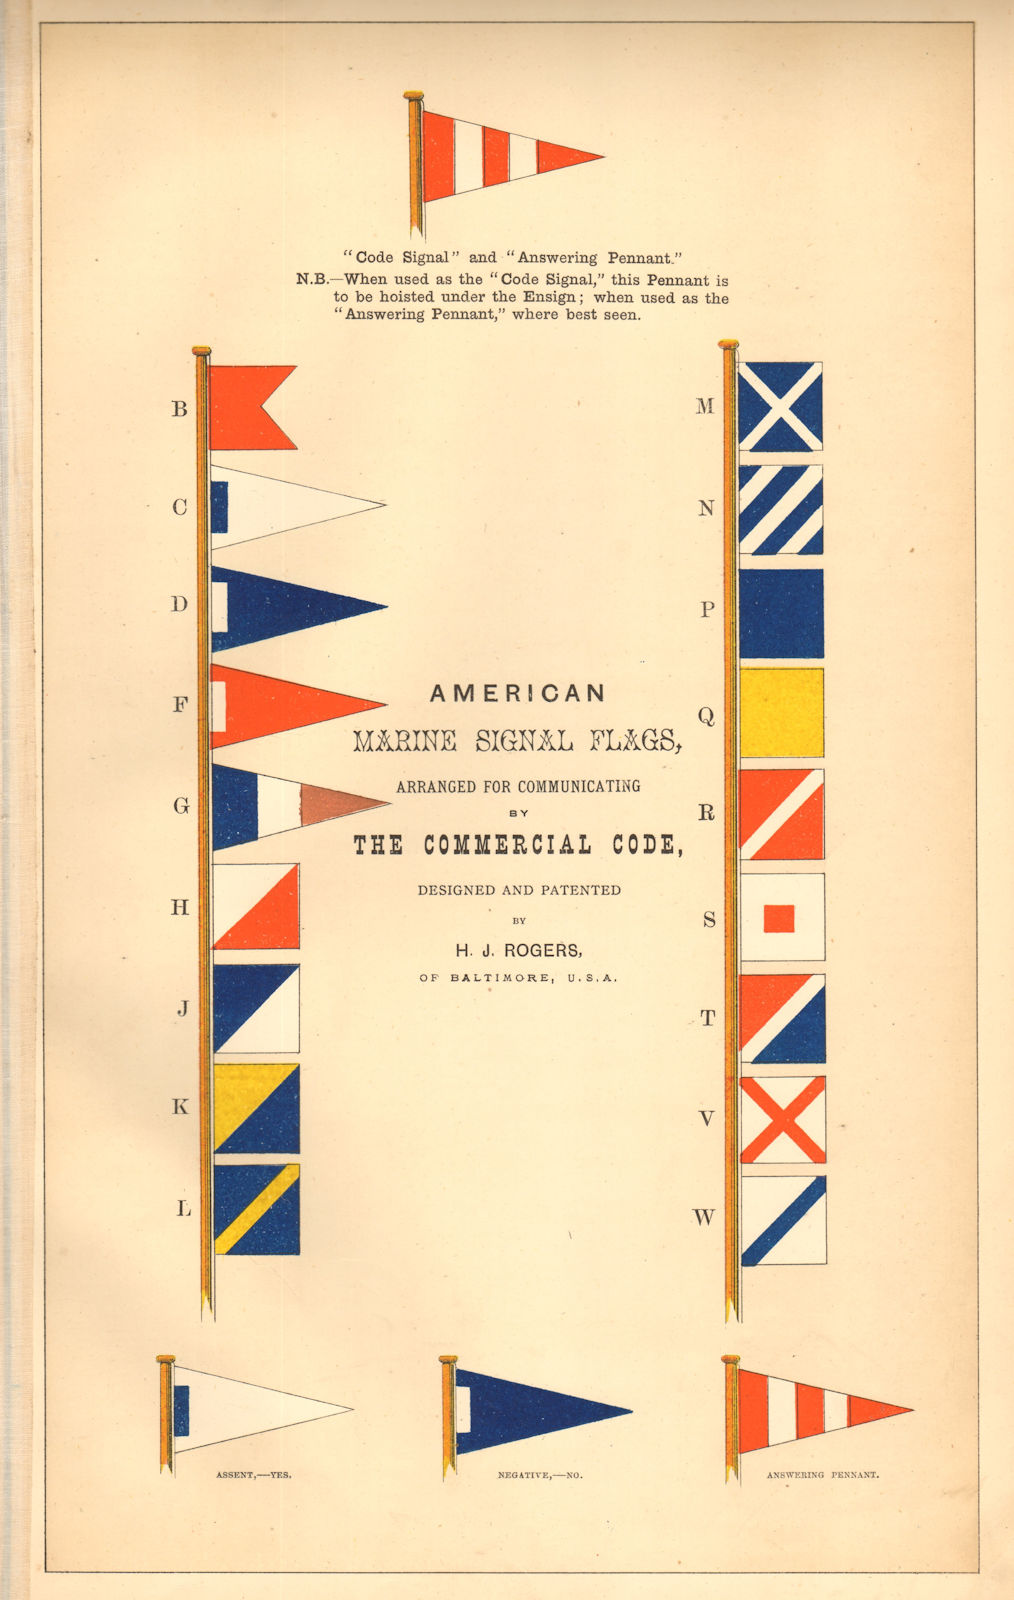 USA MARINE SIGNAL FLAGS. For communicating by the Commercial Code. HOUNSELL 1873